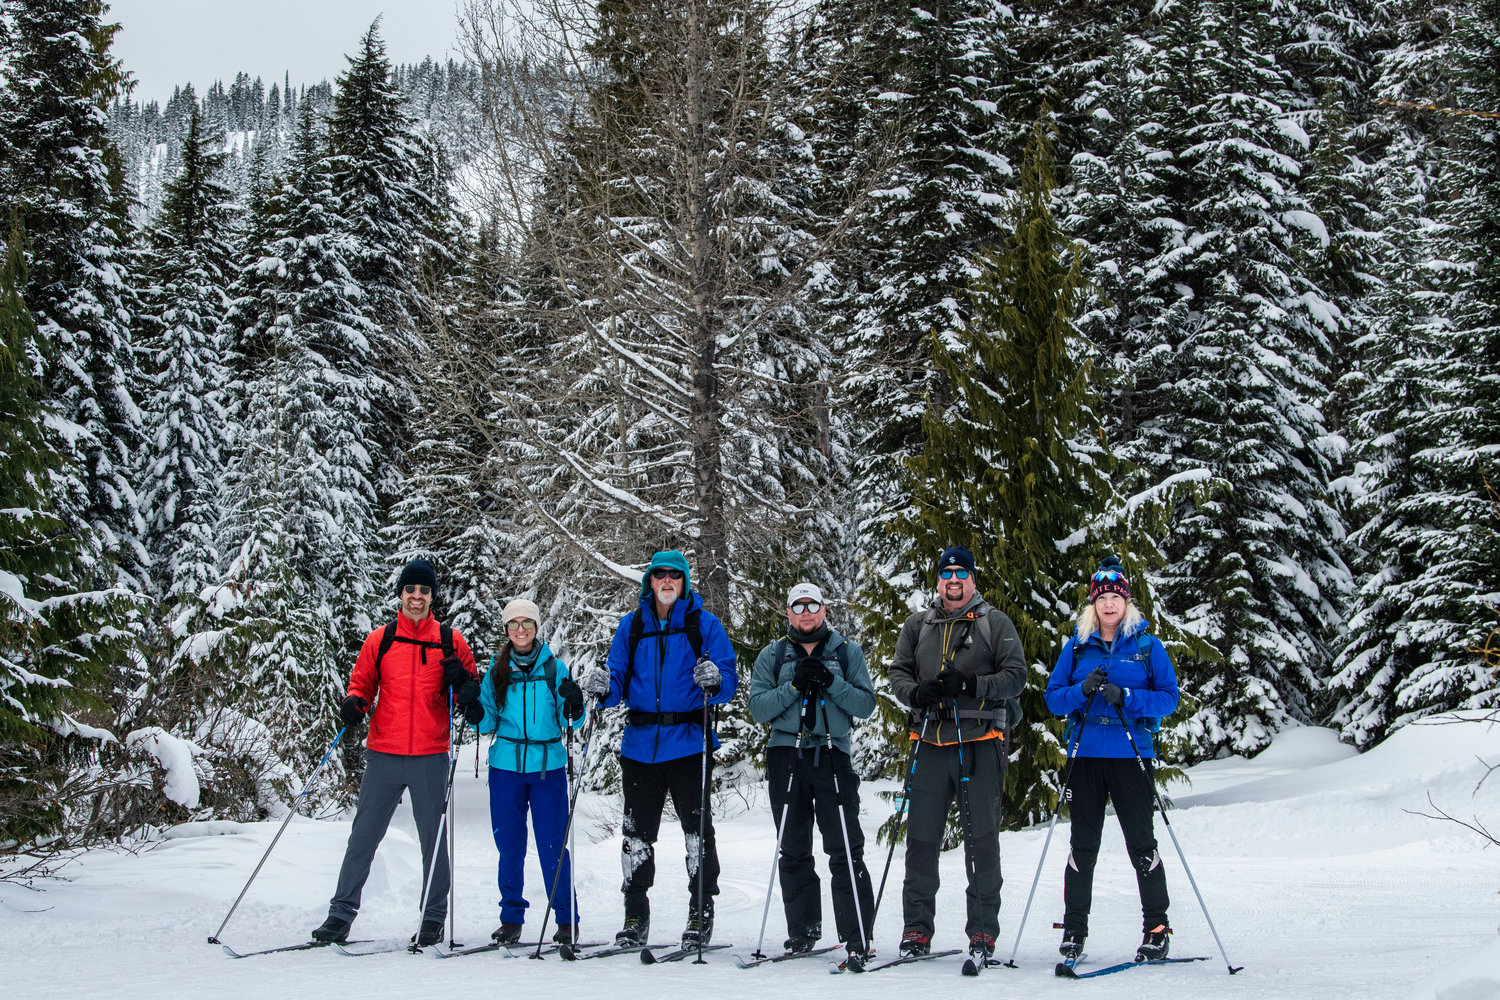 Members of the Olympia Mountaineers, from left,Thomas Harvell, Brittany Harvell, Dennis Pennell, Robbie Carrey, Scott Carlson and Christina Eudy, enjoy a day of cross-country skiing on Sunday.